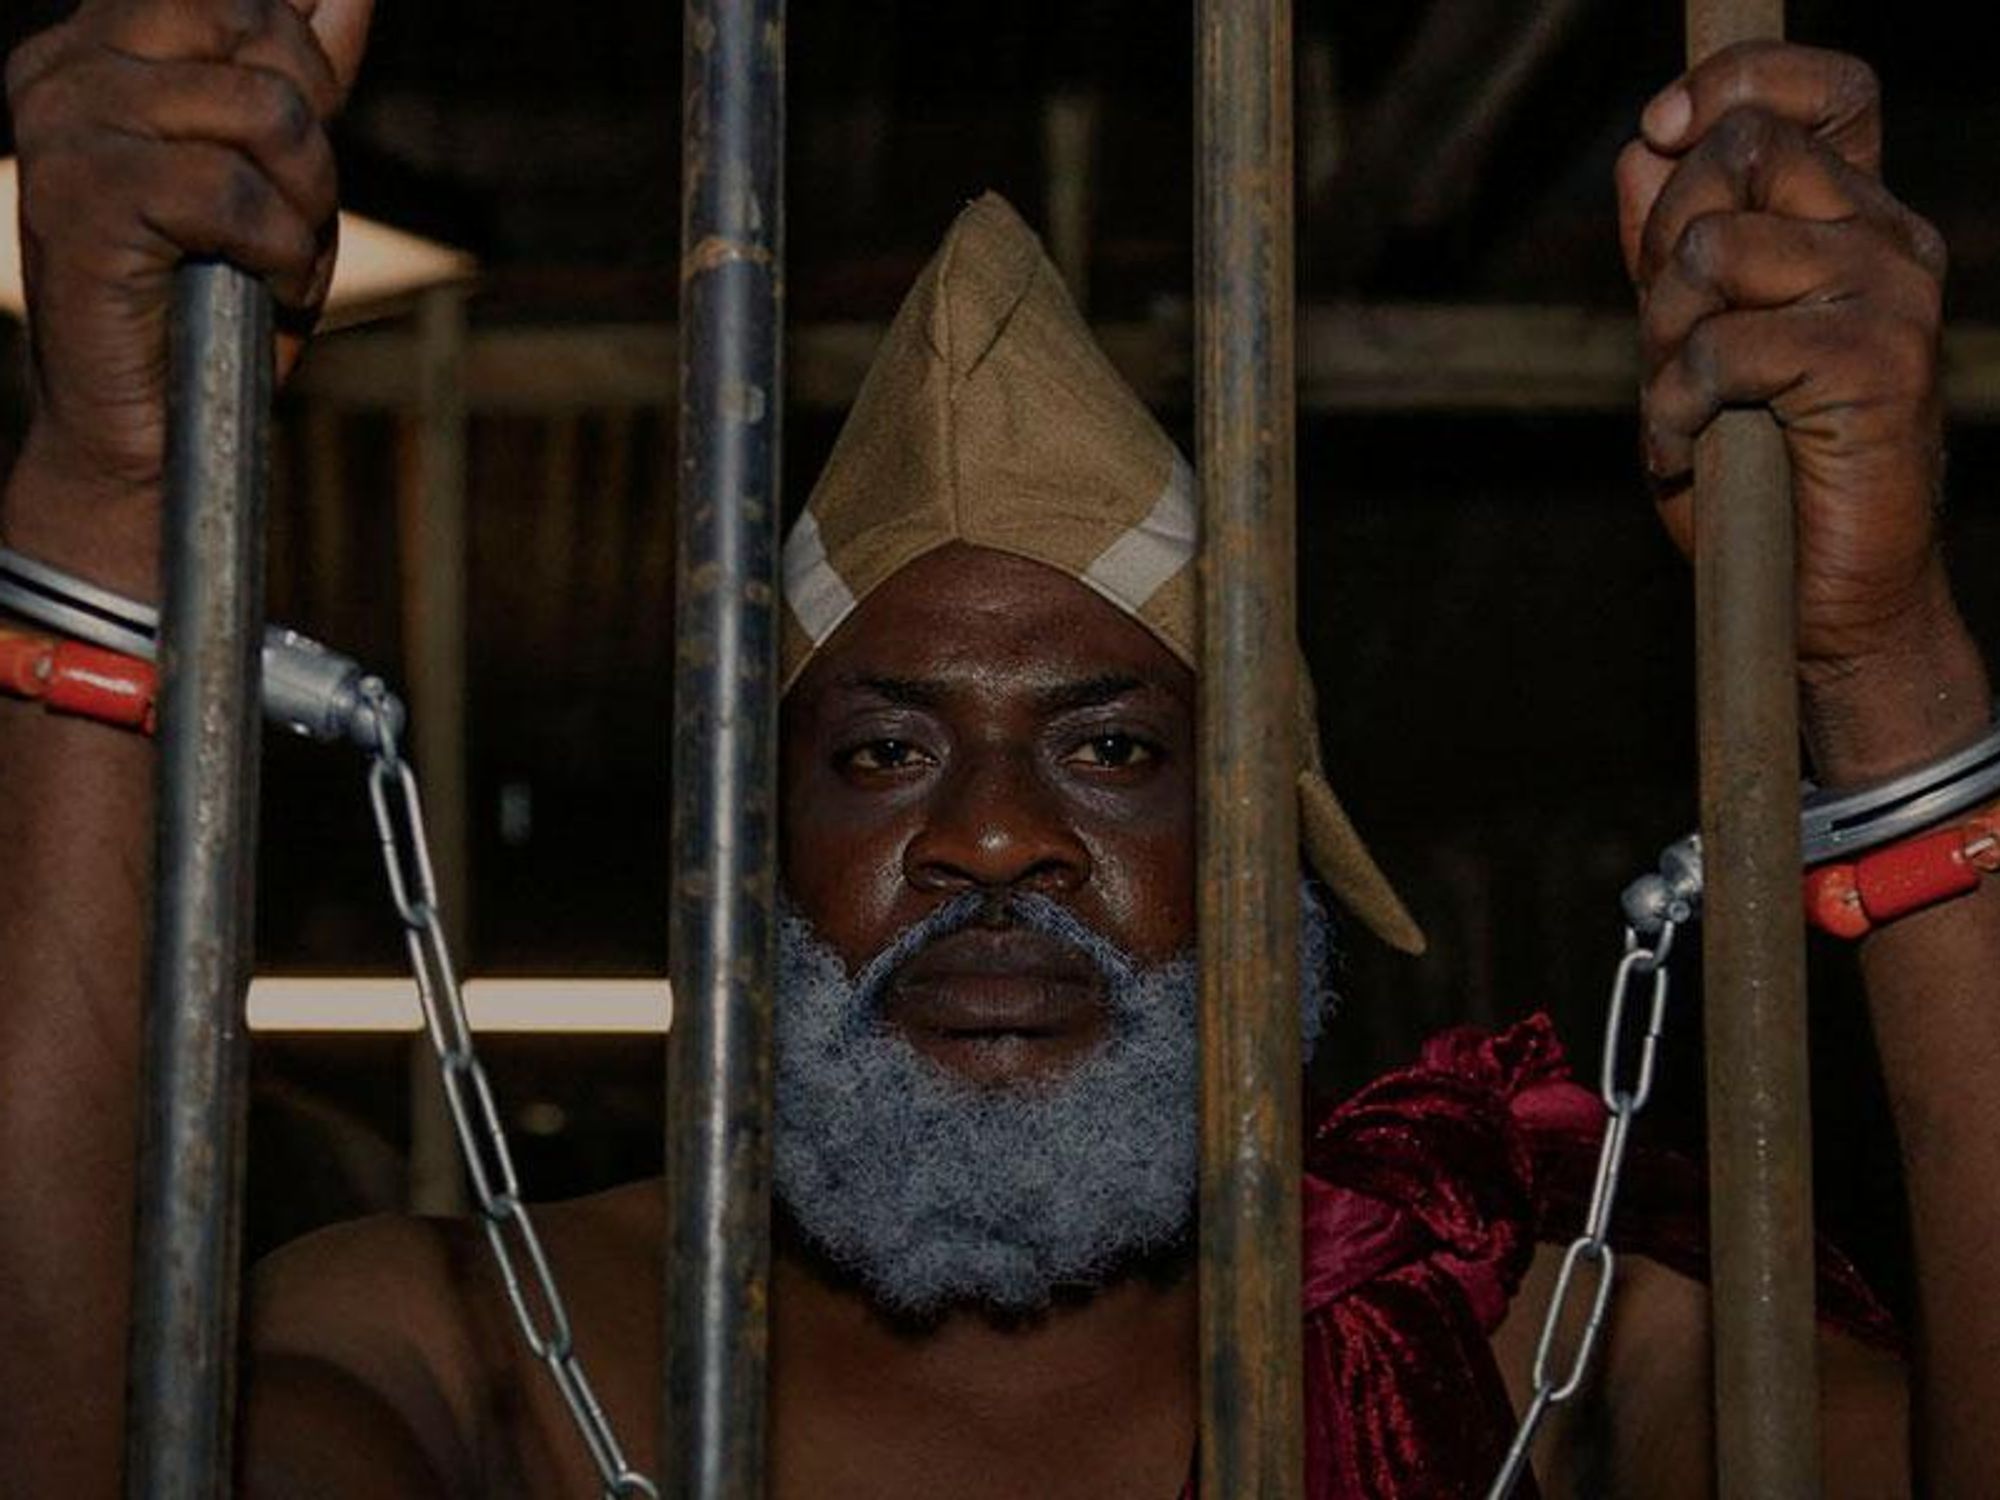 A still from the film The King's Horseman of a man in shackles behind bars